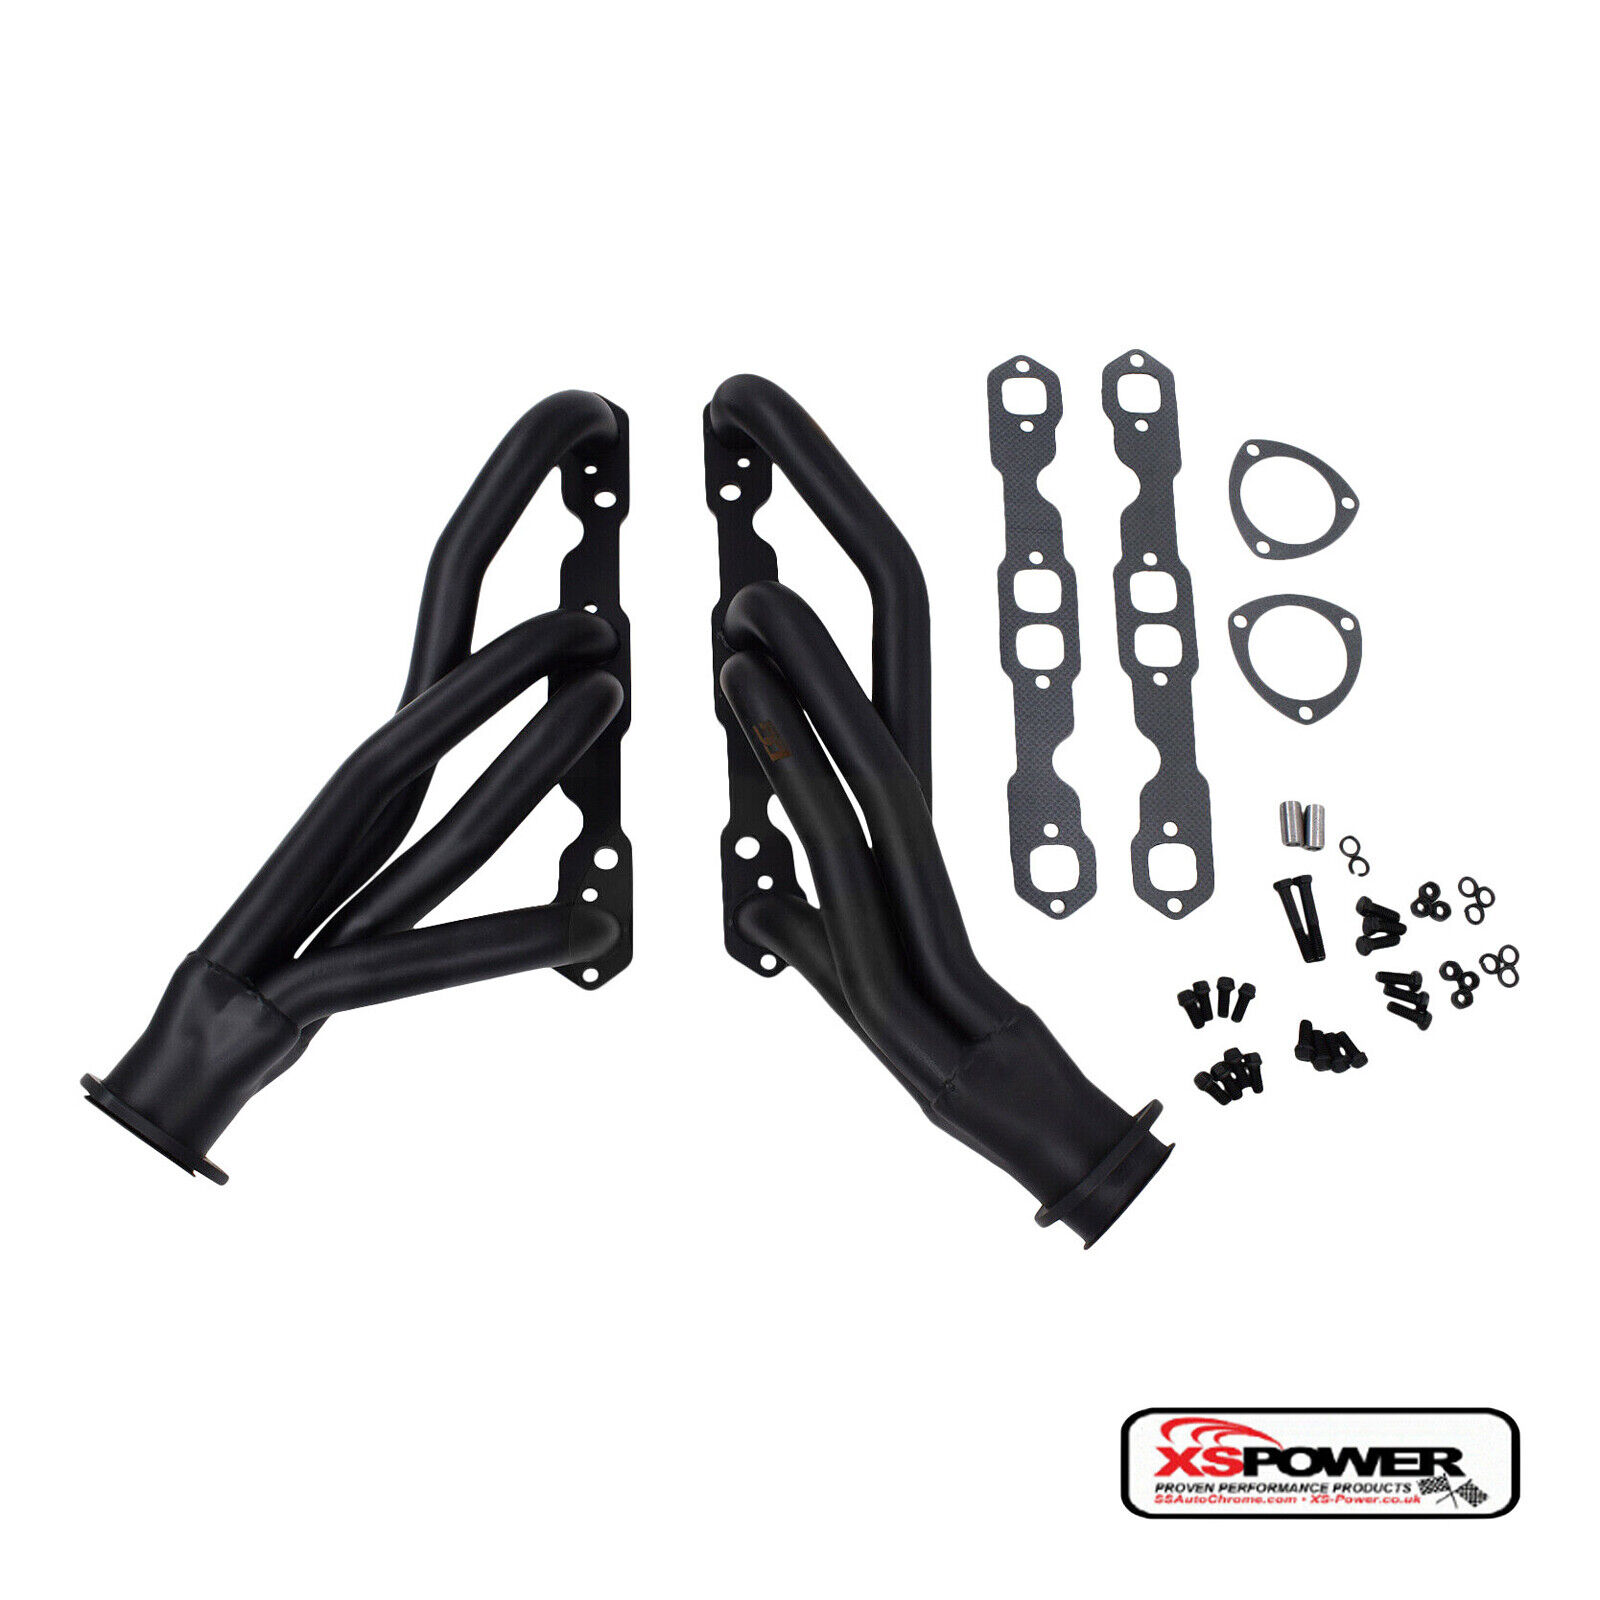   Small Block V8 Shorty Headers for Chevy 65-90 Caprice Impala Bel Air Biscayne